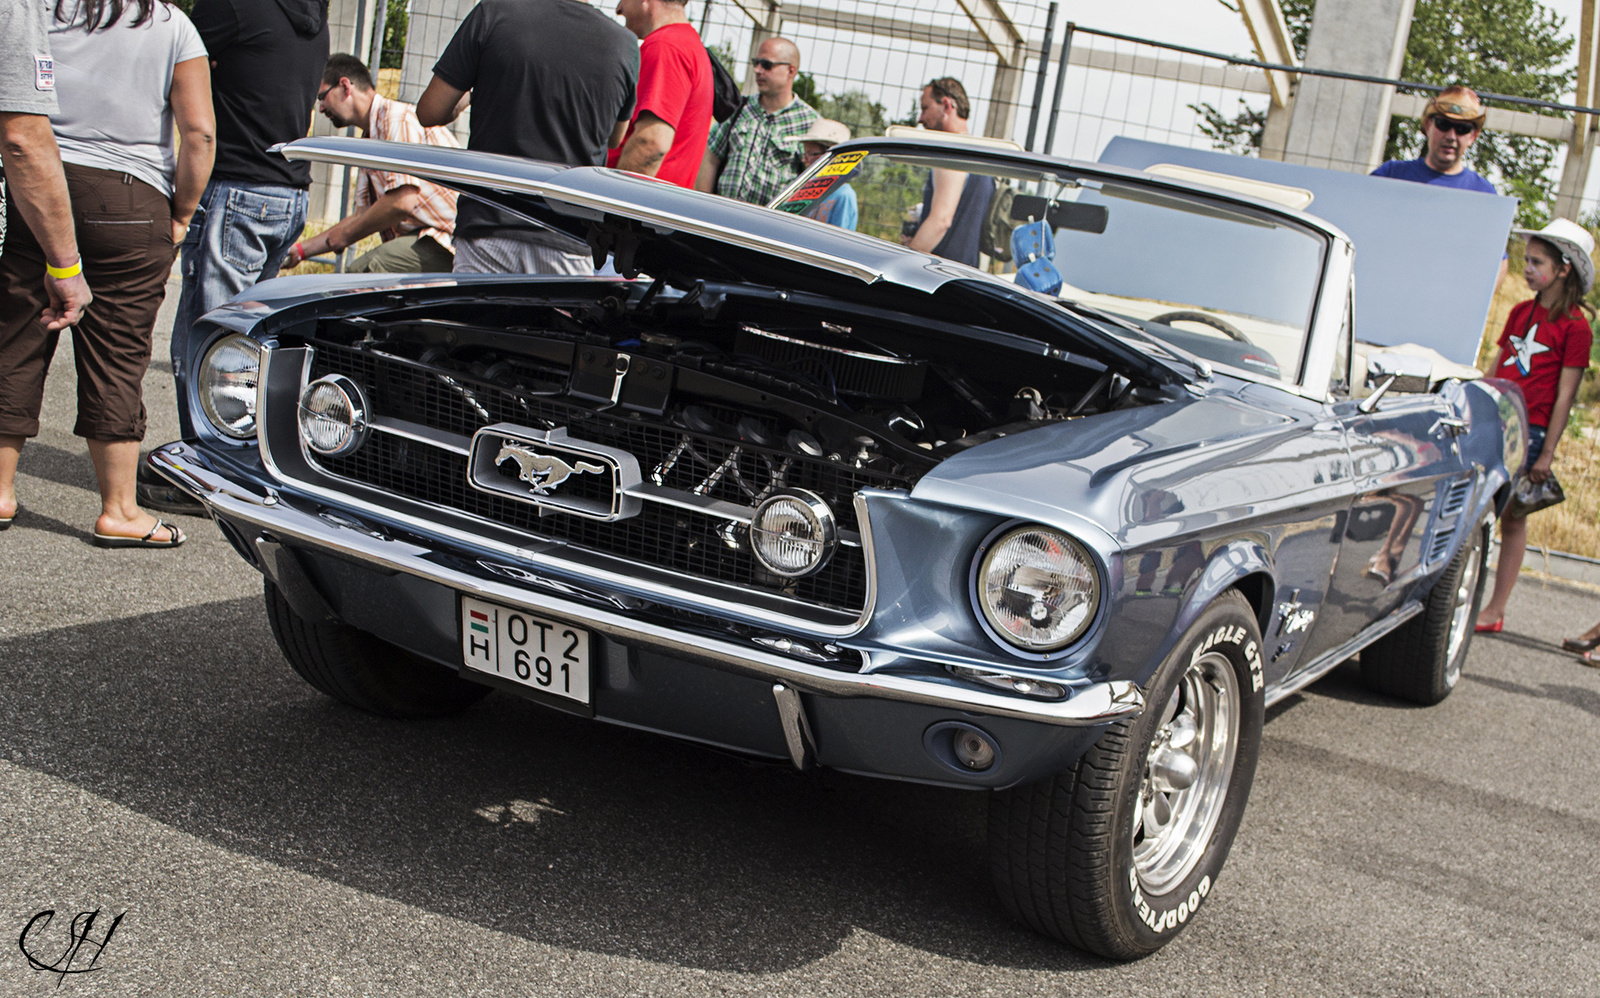 65' Ford Mustang